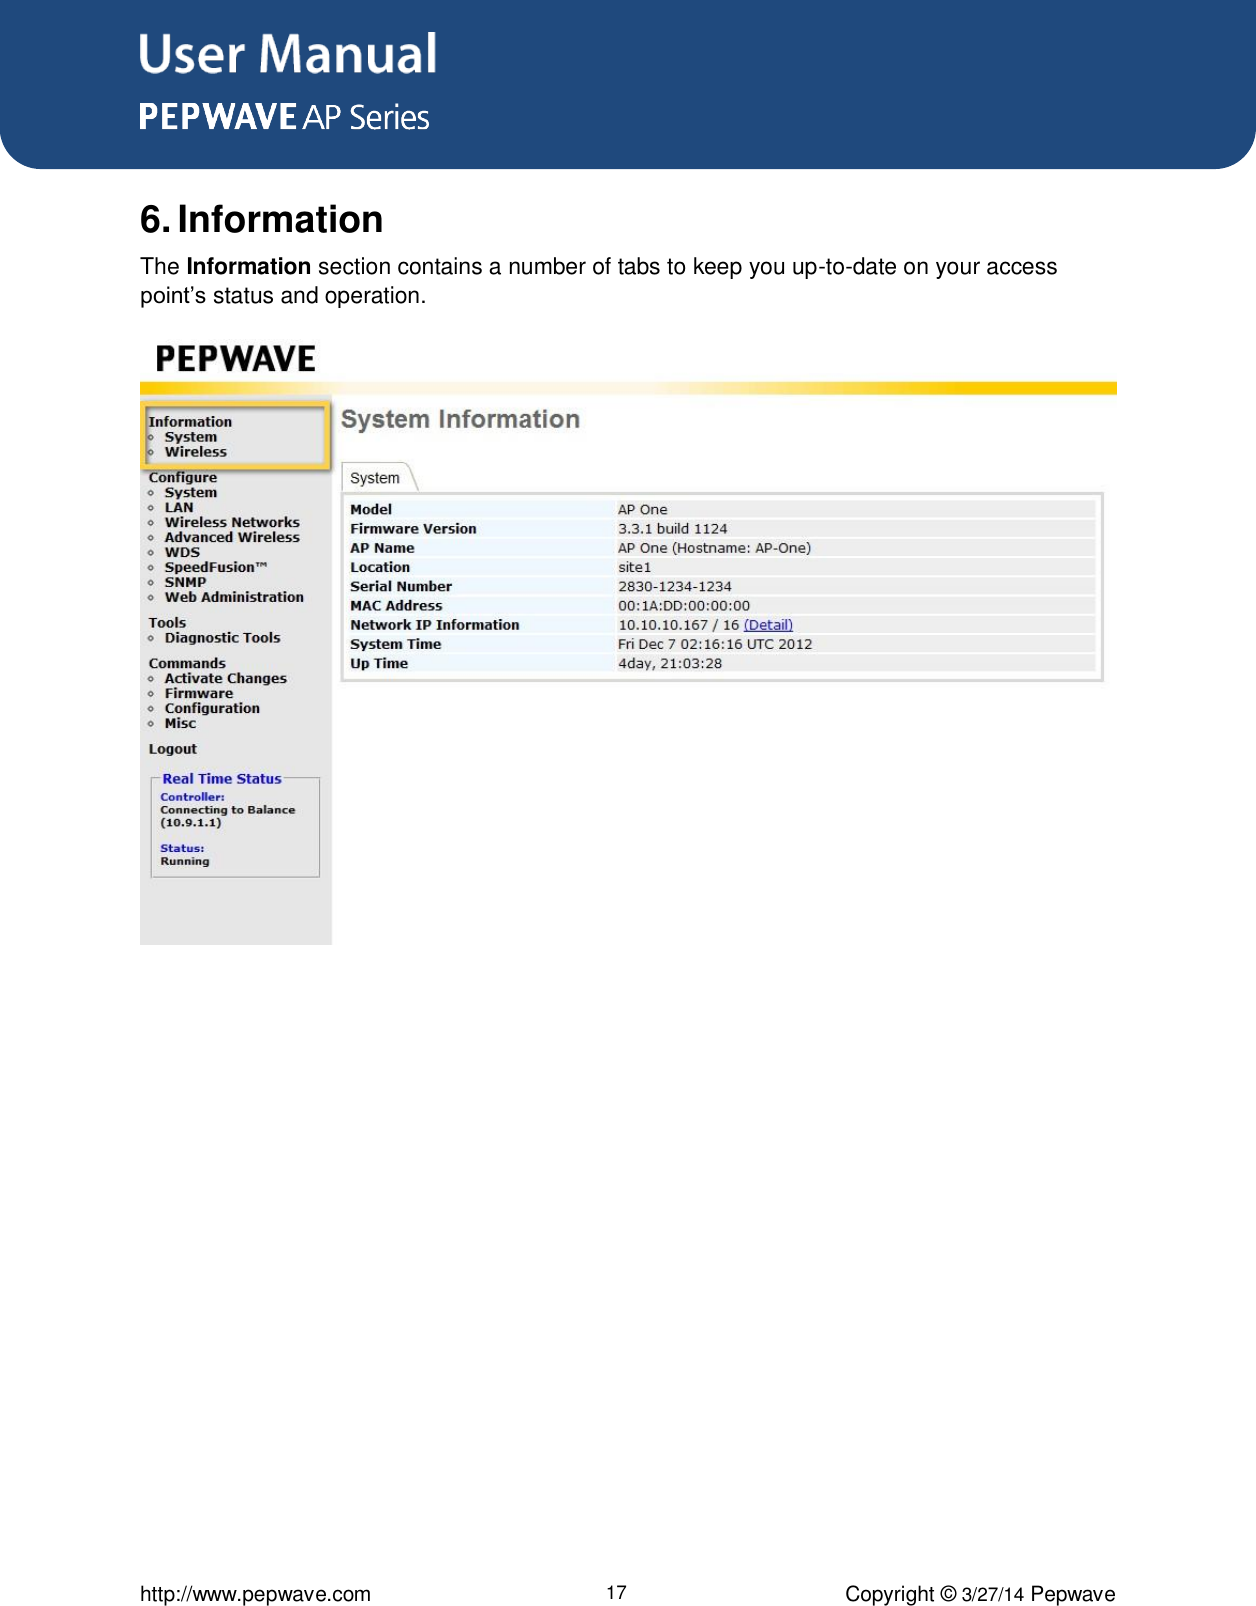 User Manual      http://www.pepwave.com 17 Copyright ©  3/27/14 Pepwave  6. Information The Information section contains a number of tabs to keep you up-to-date on your access point’s status and operation.  